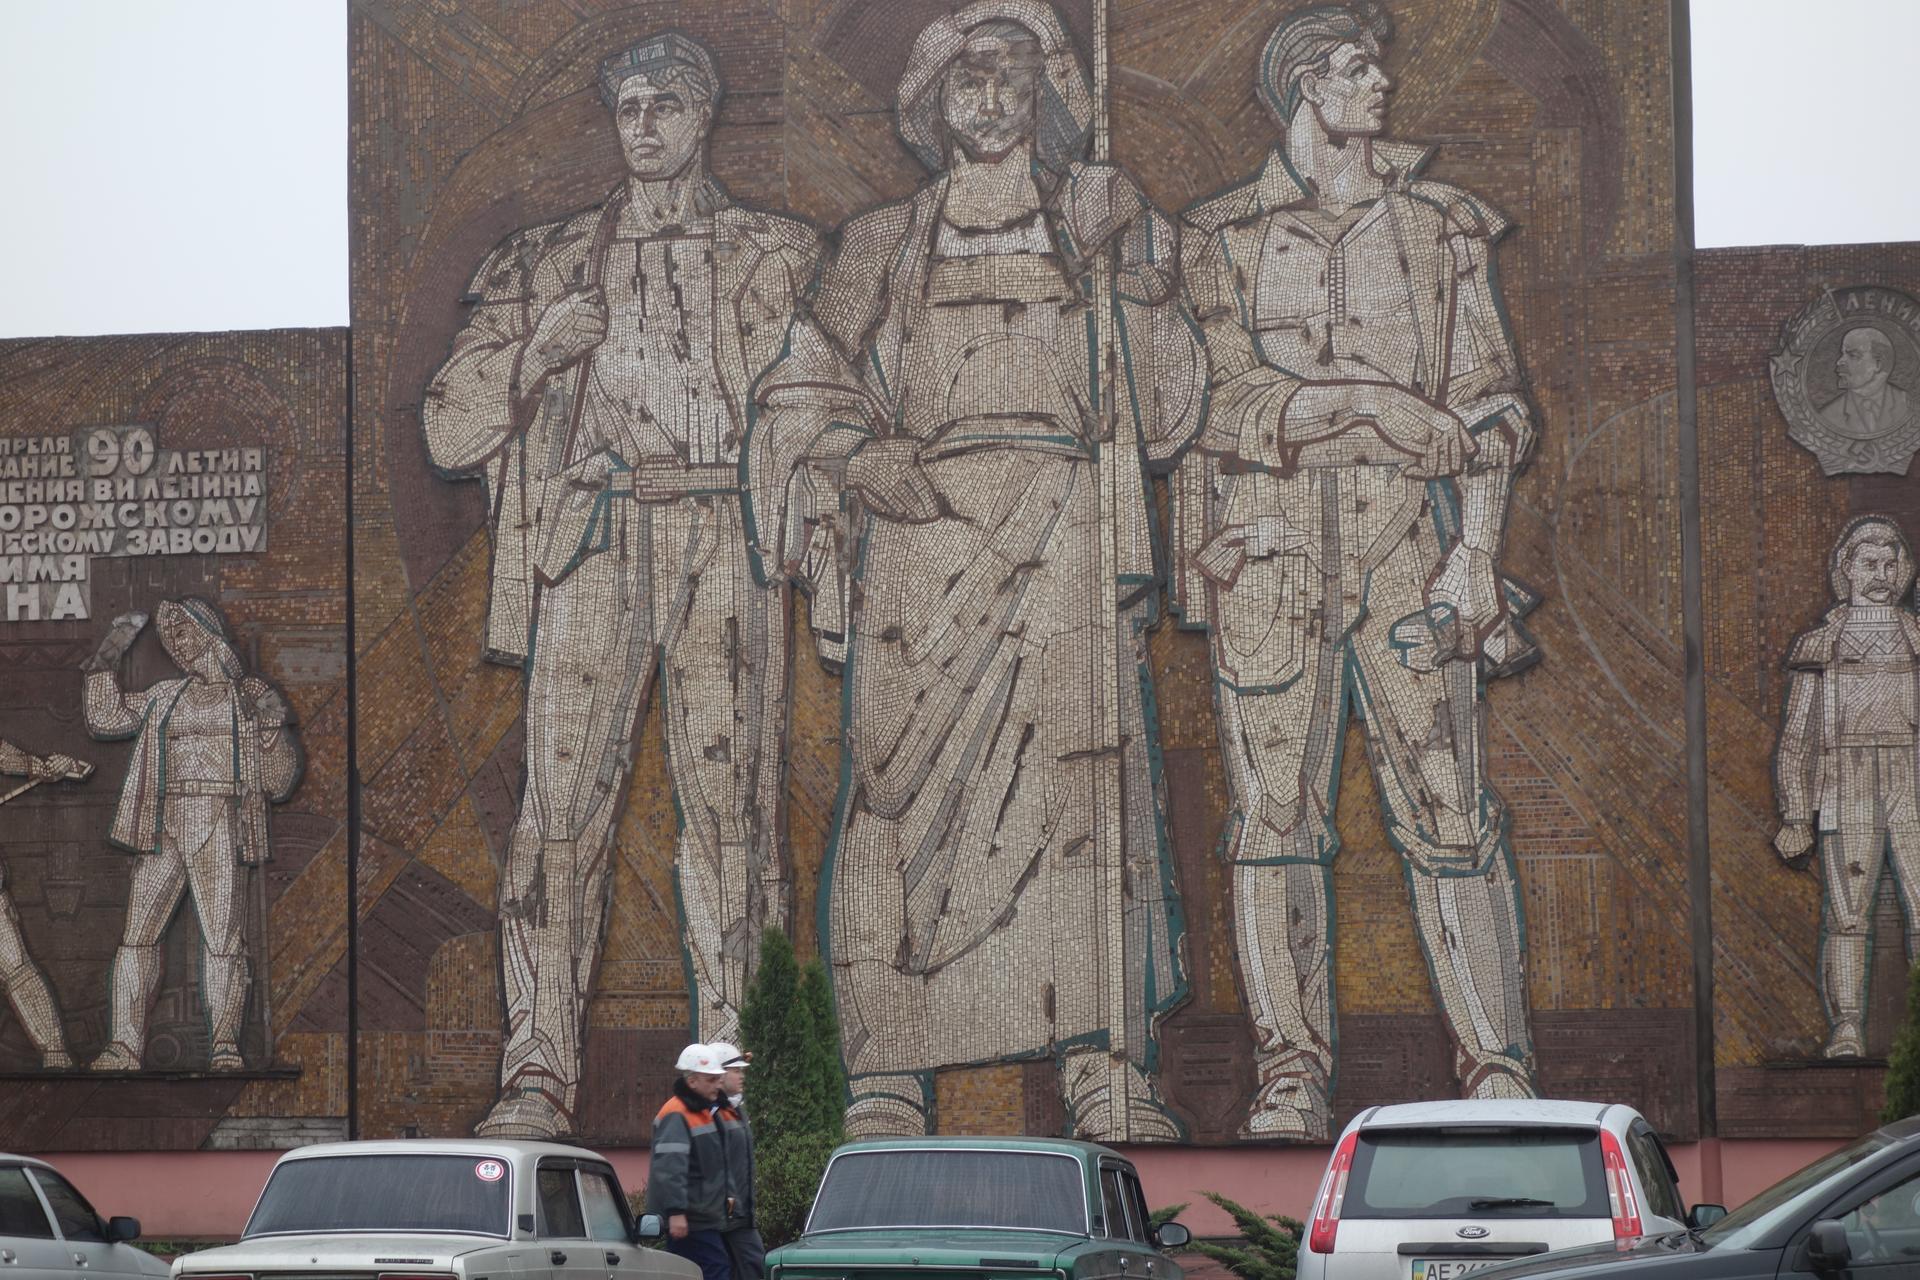 Mosaic of Soviet design in front of mining company entrance.